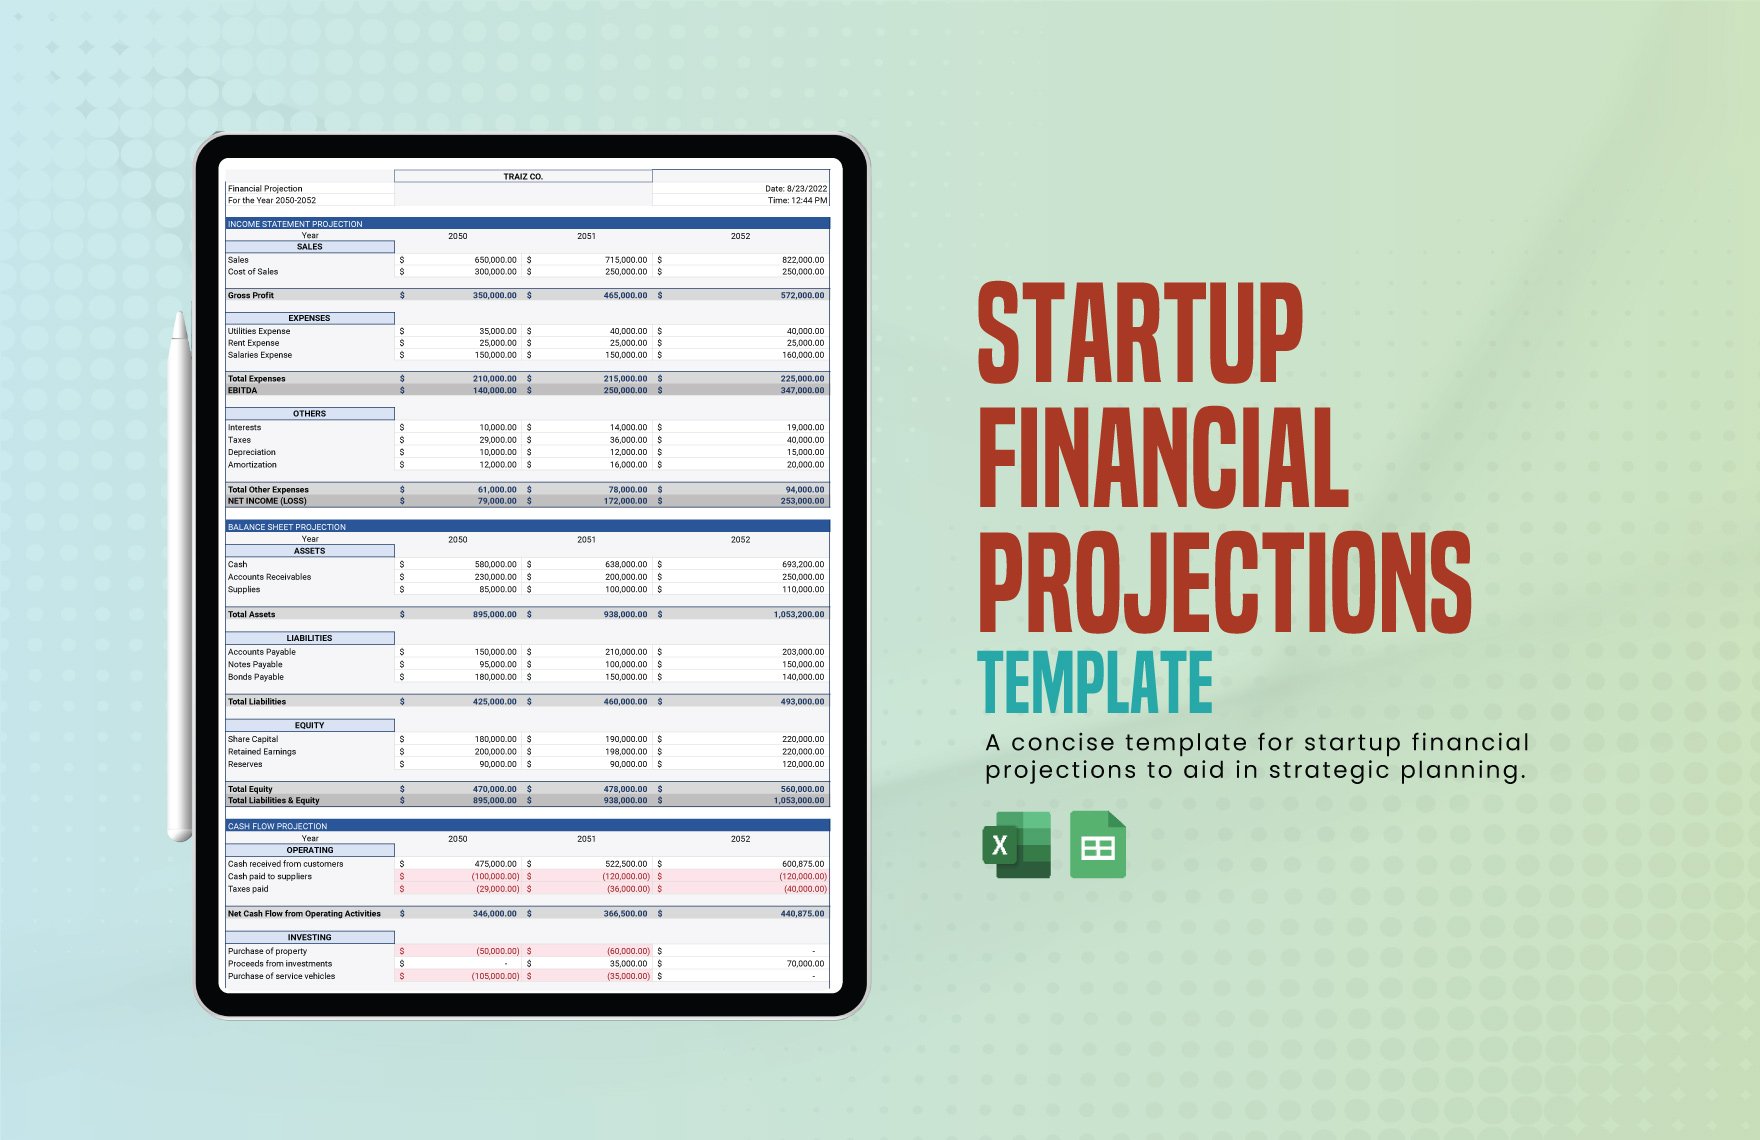 Startup Financial Projections Template